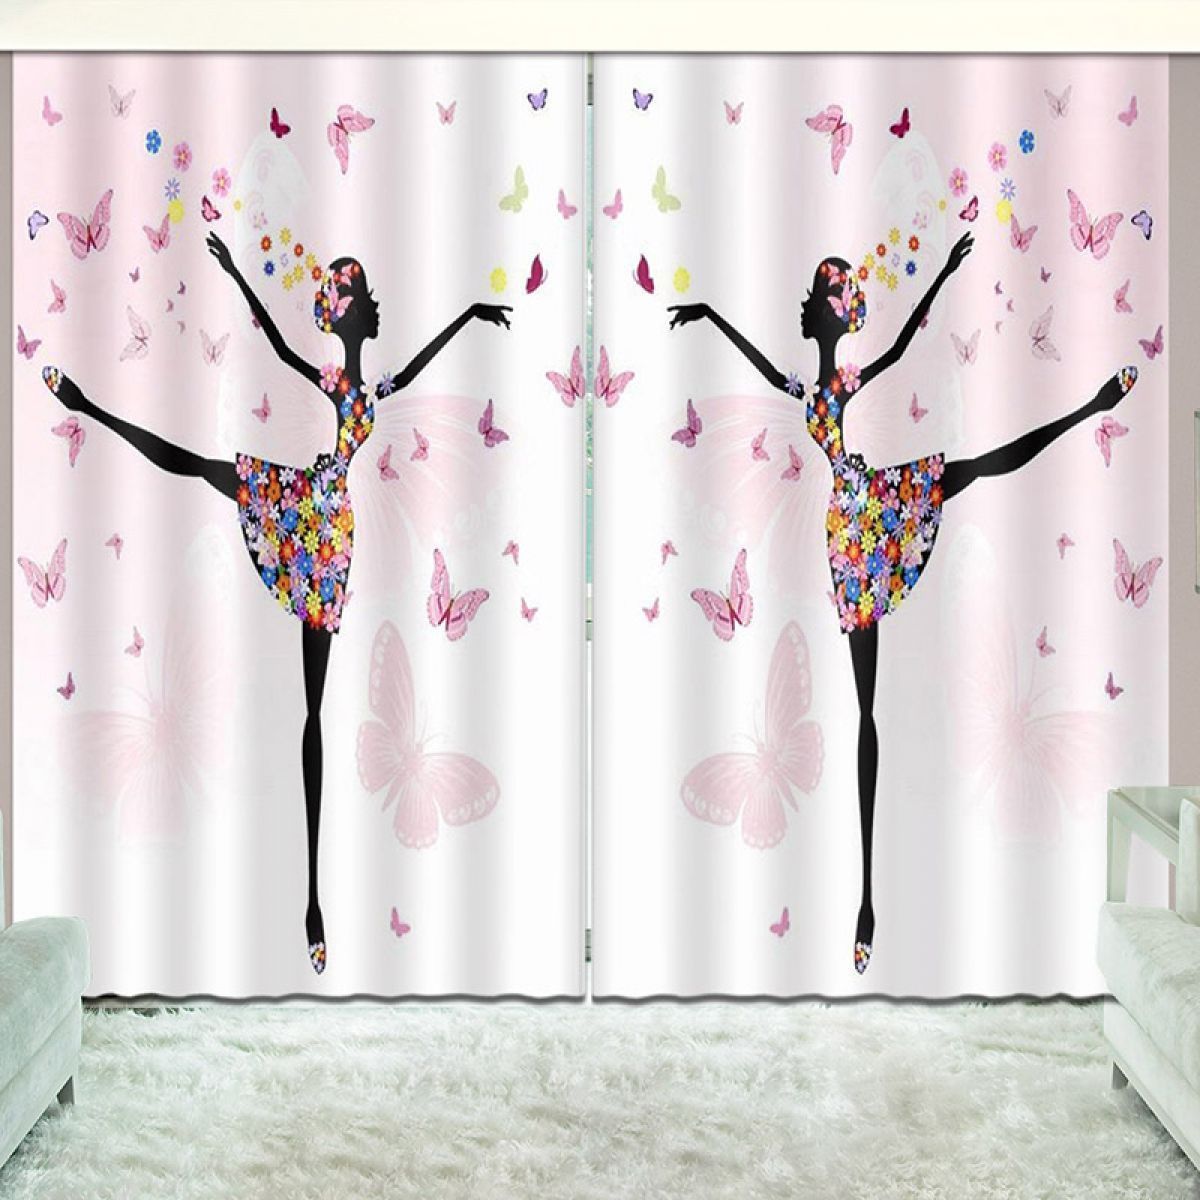 Pink Dancing Woman And Butterflies Printed Window Curtain Home Decor